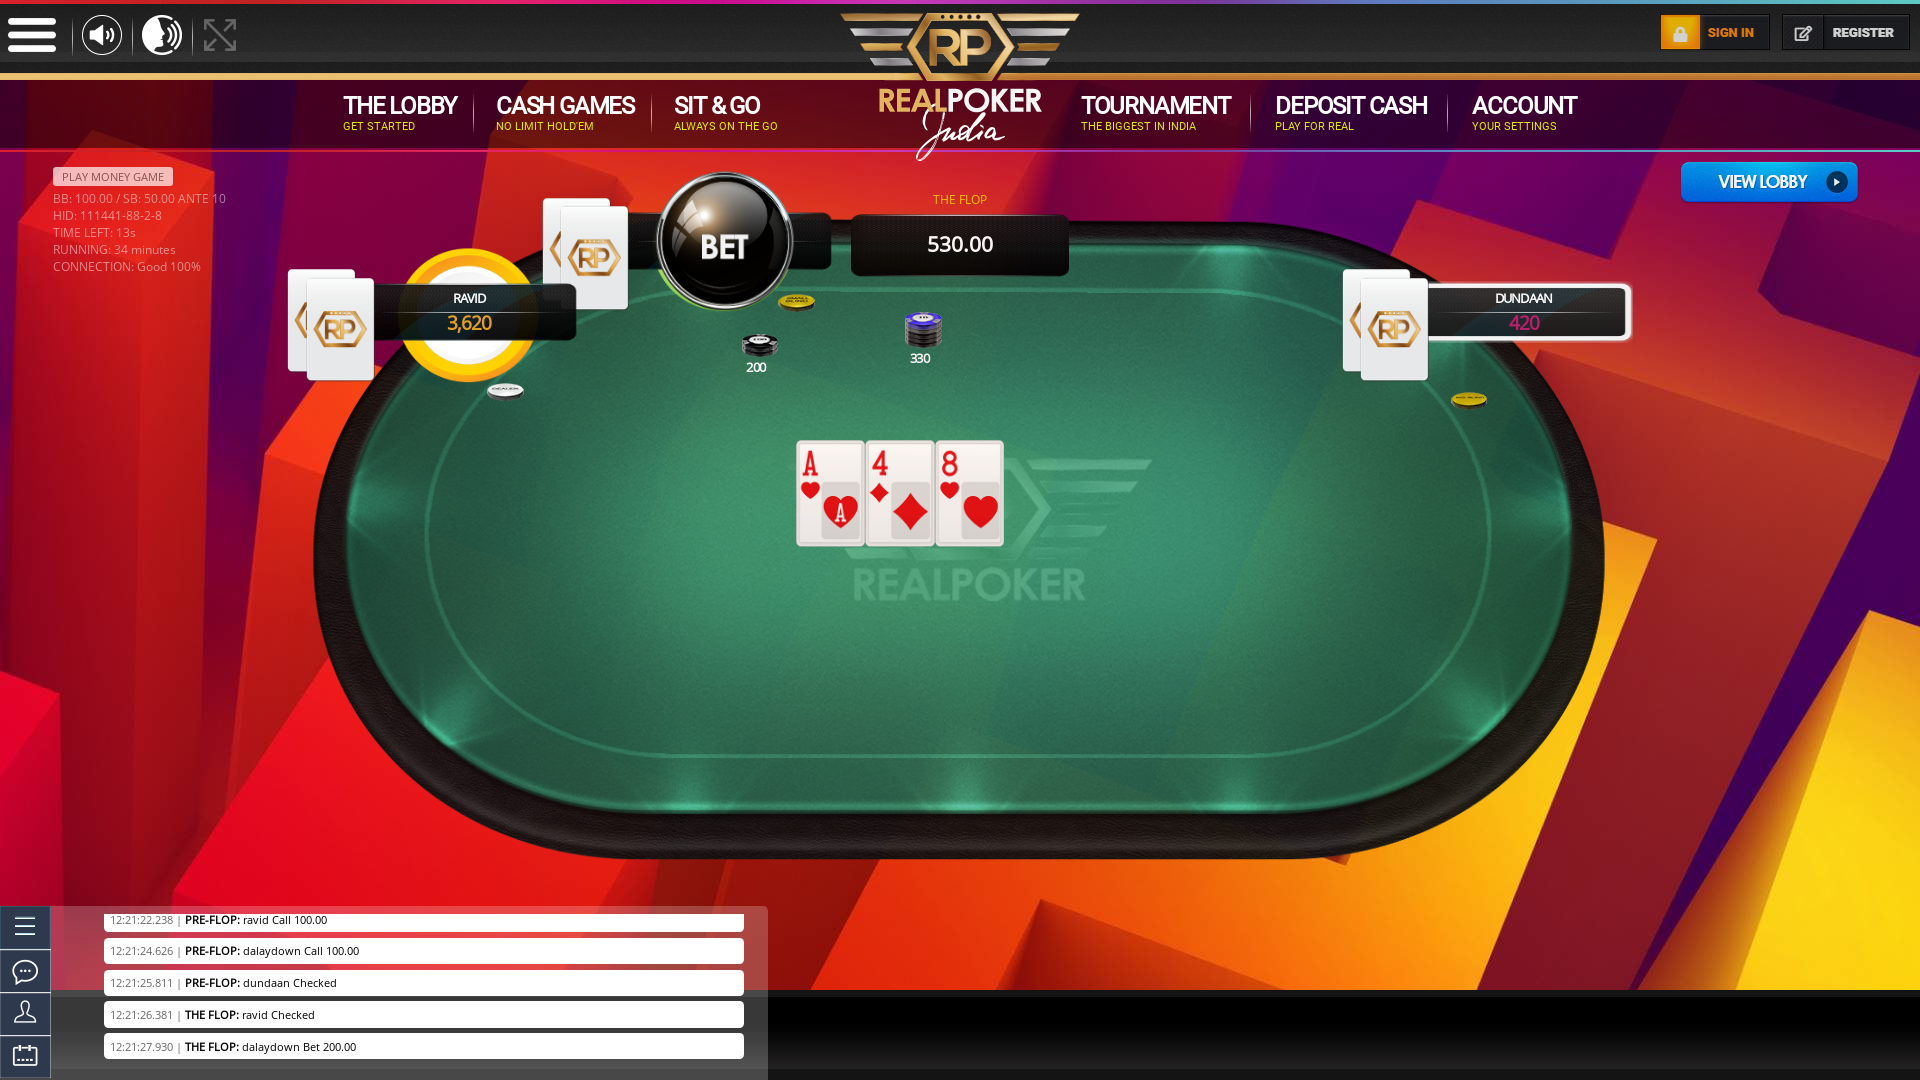 Real Indian poker on a 10 player table in the 34th minute of the game